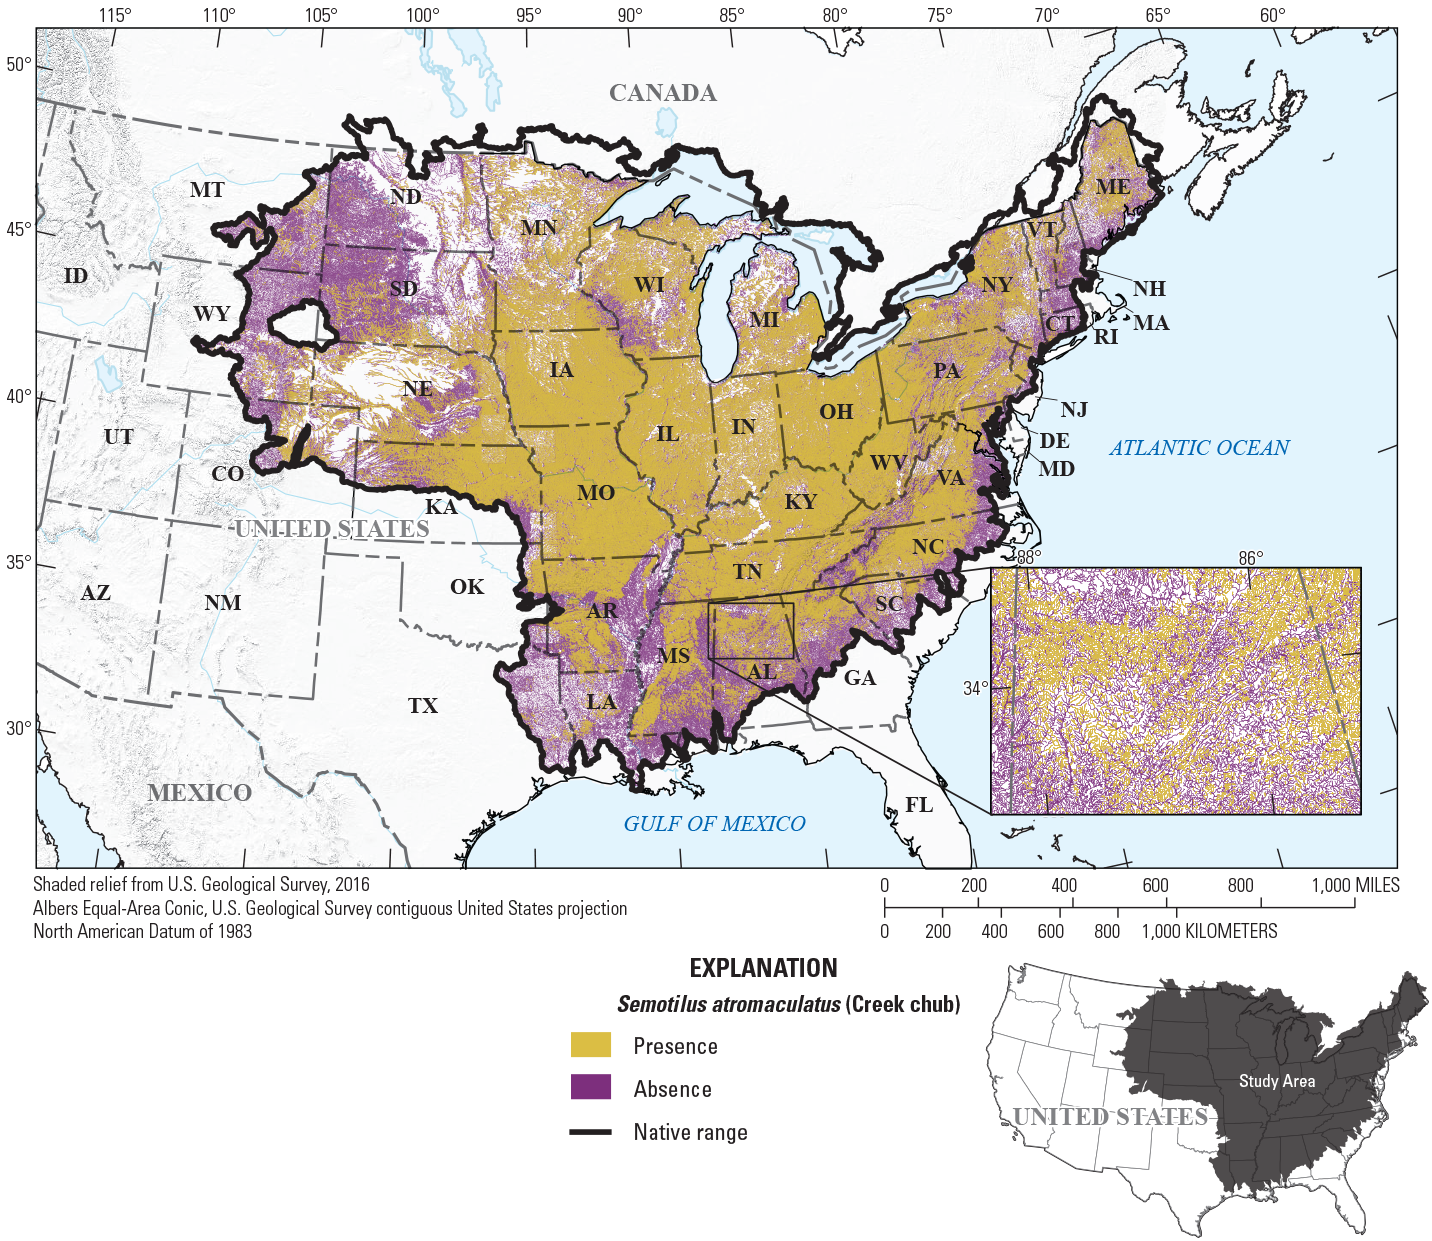 A map of the eastern United States showing streams with predicted presence of Creek
                     Chub in gold and absence in purple